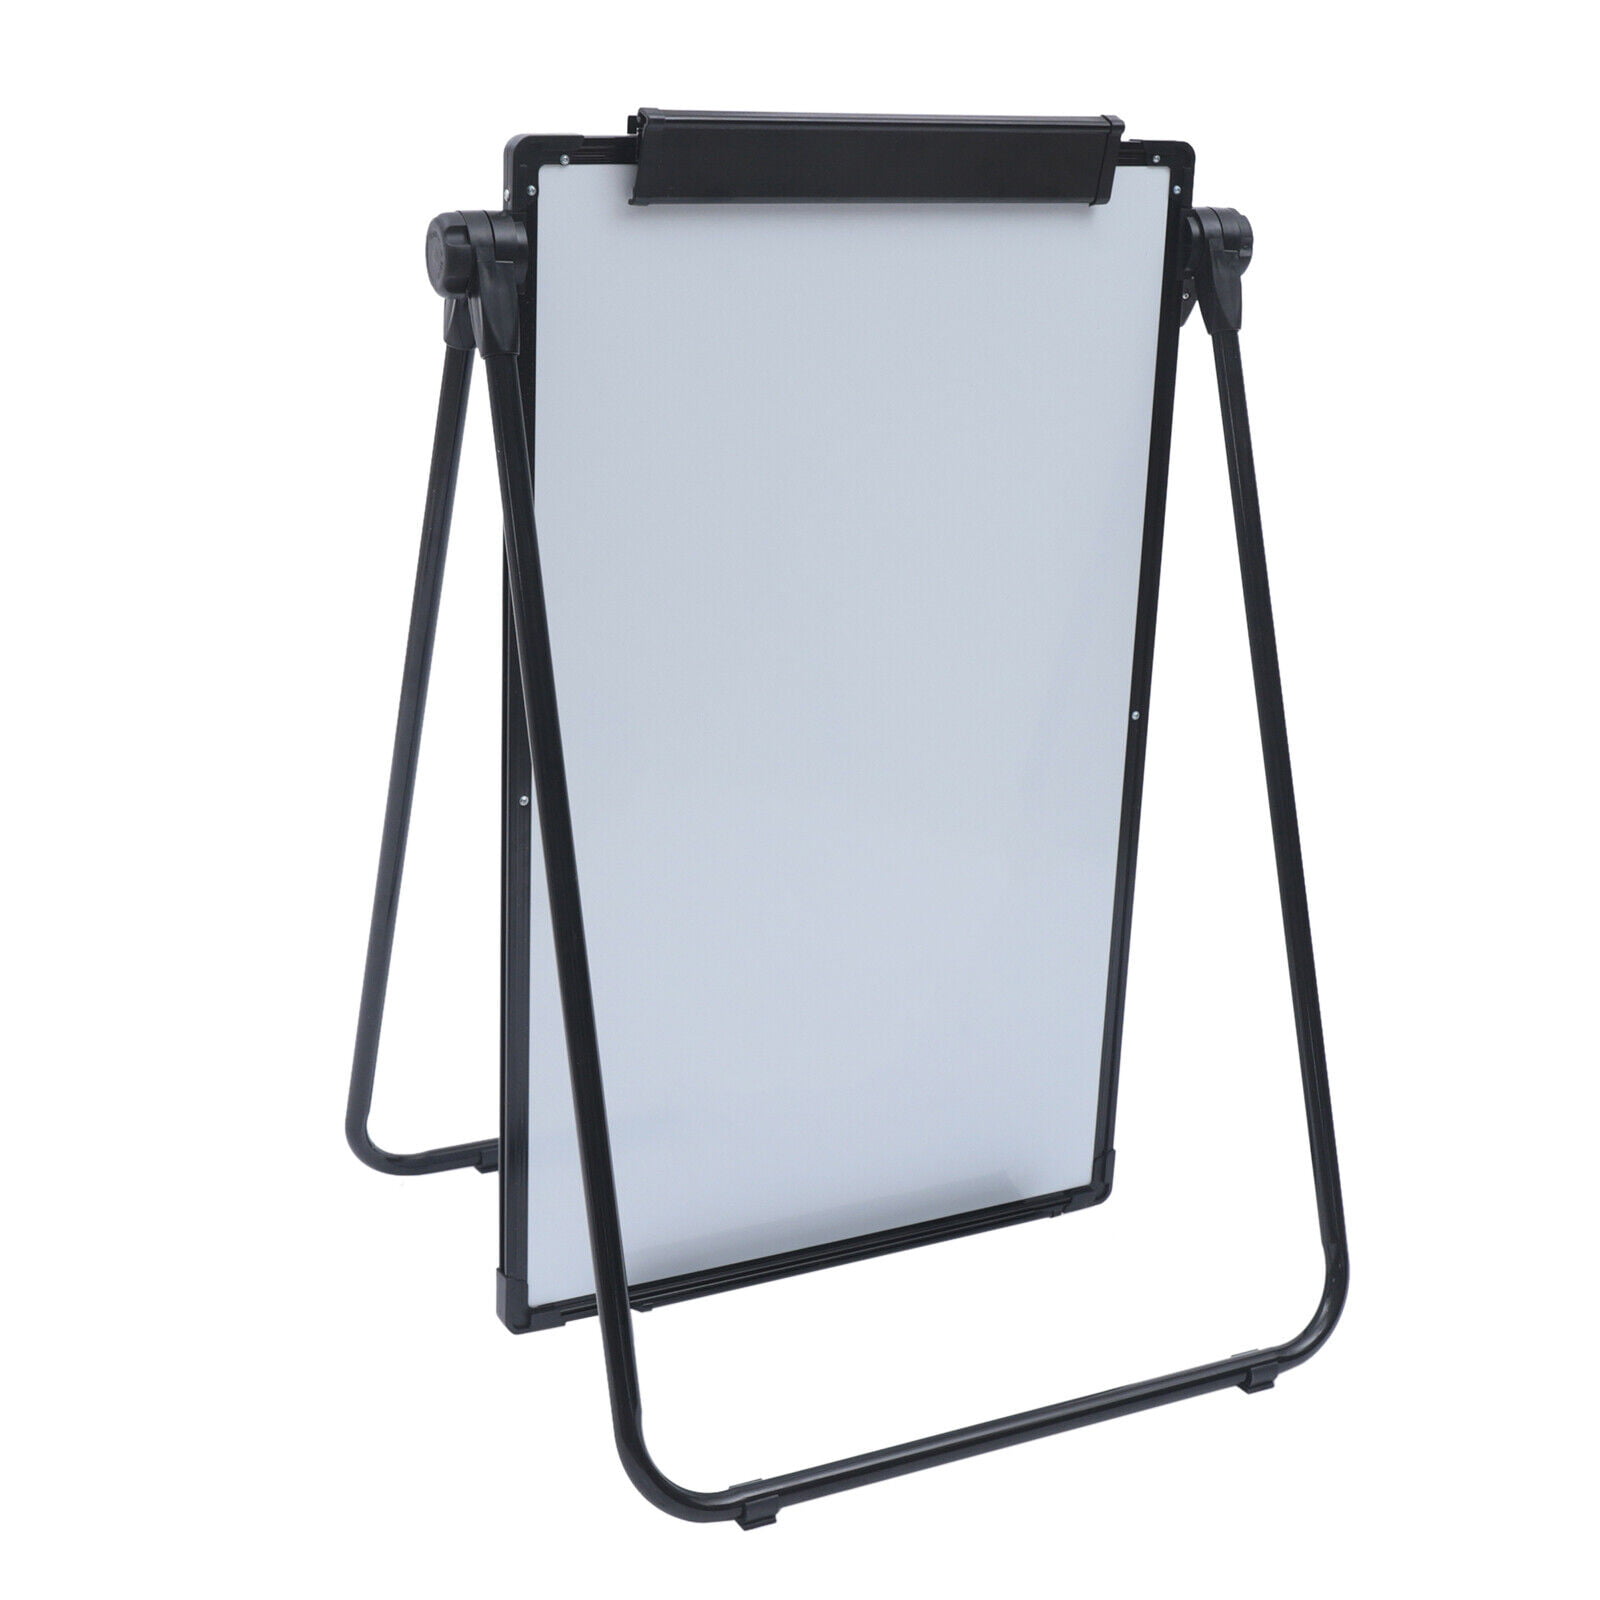 Loyalheartdy 35x24In Portable Whiteboard,Double Sided Magnetic Dry Erase  Board Free Standing Adjustable Flip Chart Easel